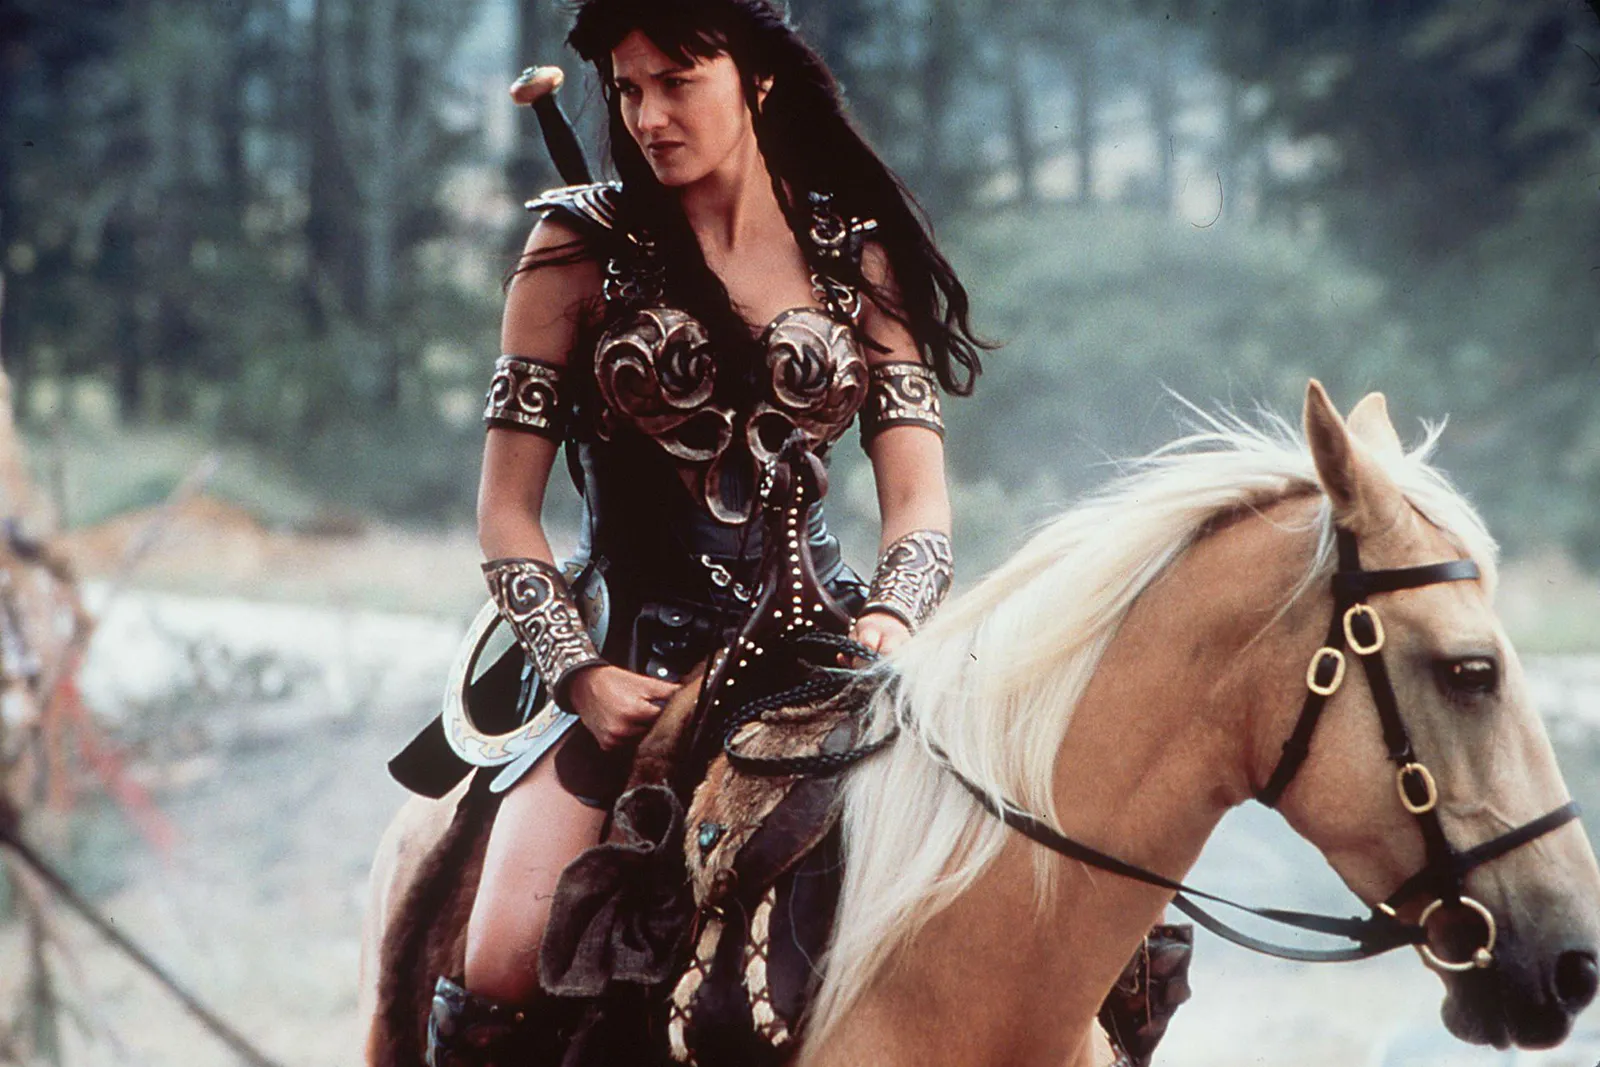 Lucy Lawless as Xena in the show (Credits: Wired UK)